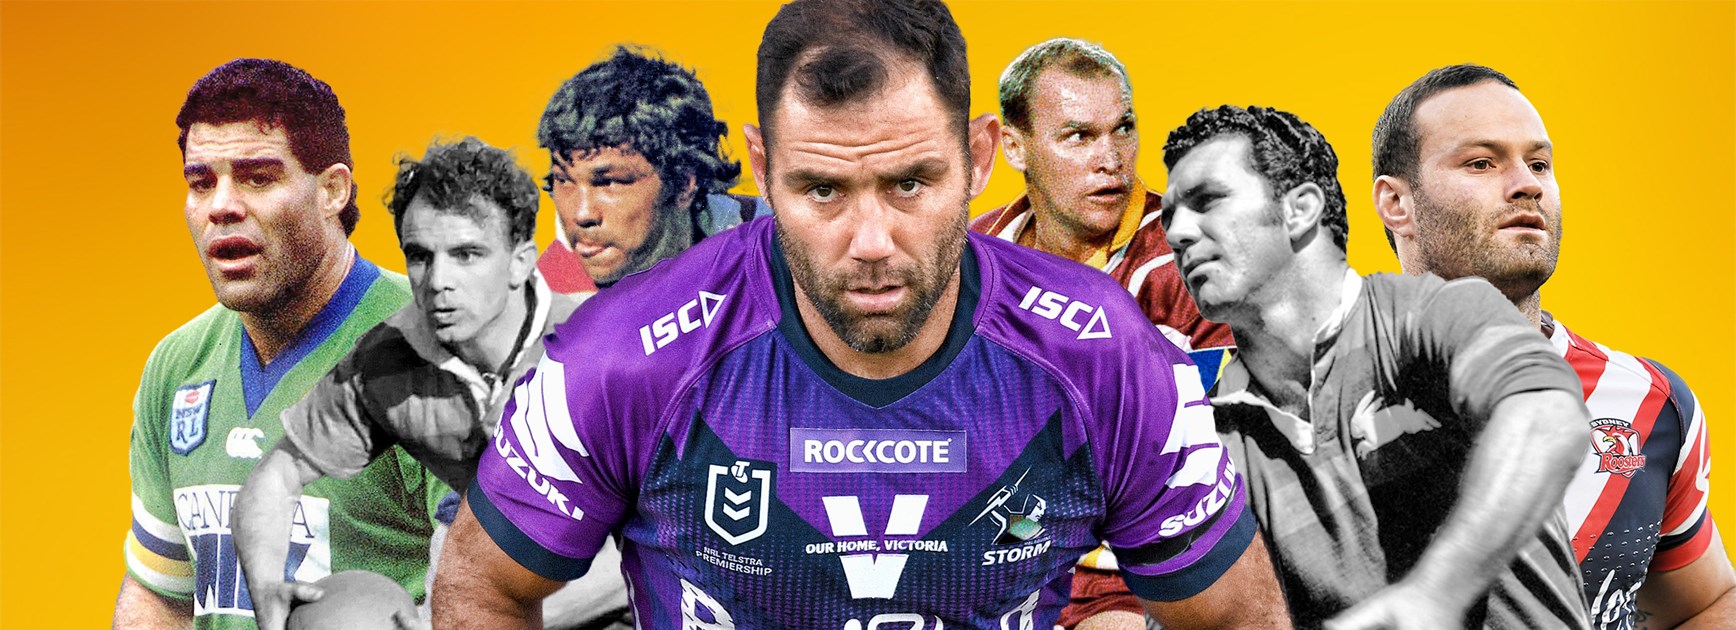 Leader of men: Smith voted rugby league's greatest captain